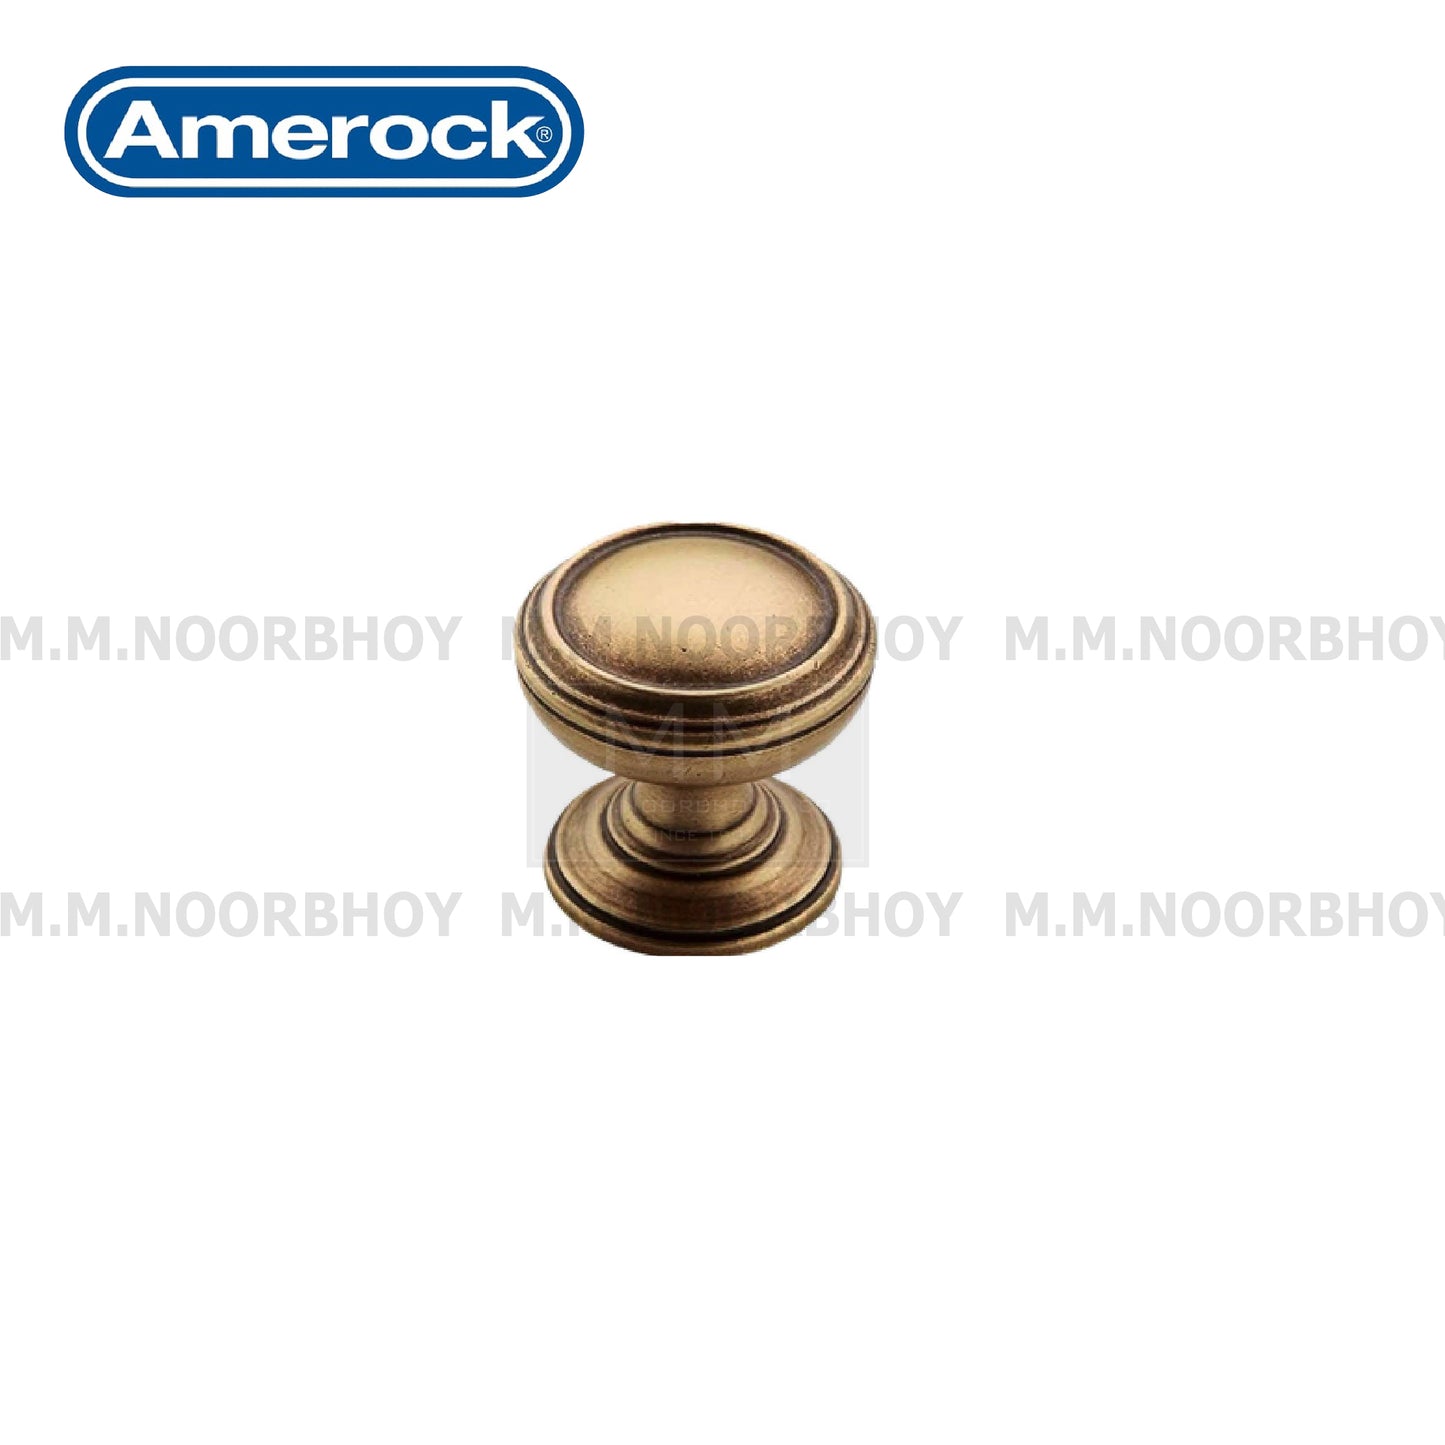 Amerock Glided Bronze Color Cabinet Knob (5.5x4.25x4.5 in) Each - ARCB24300GBZ